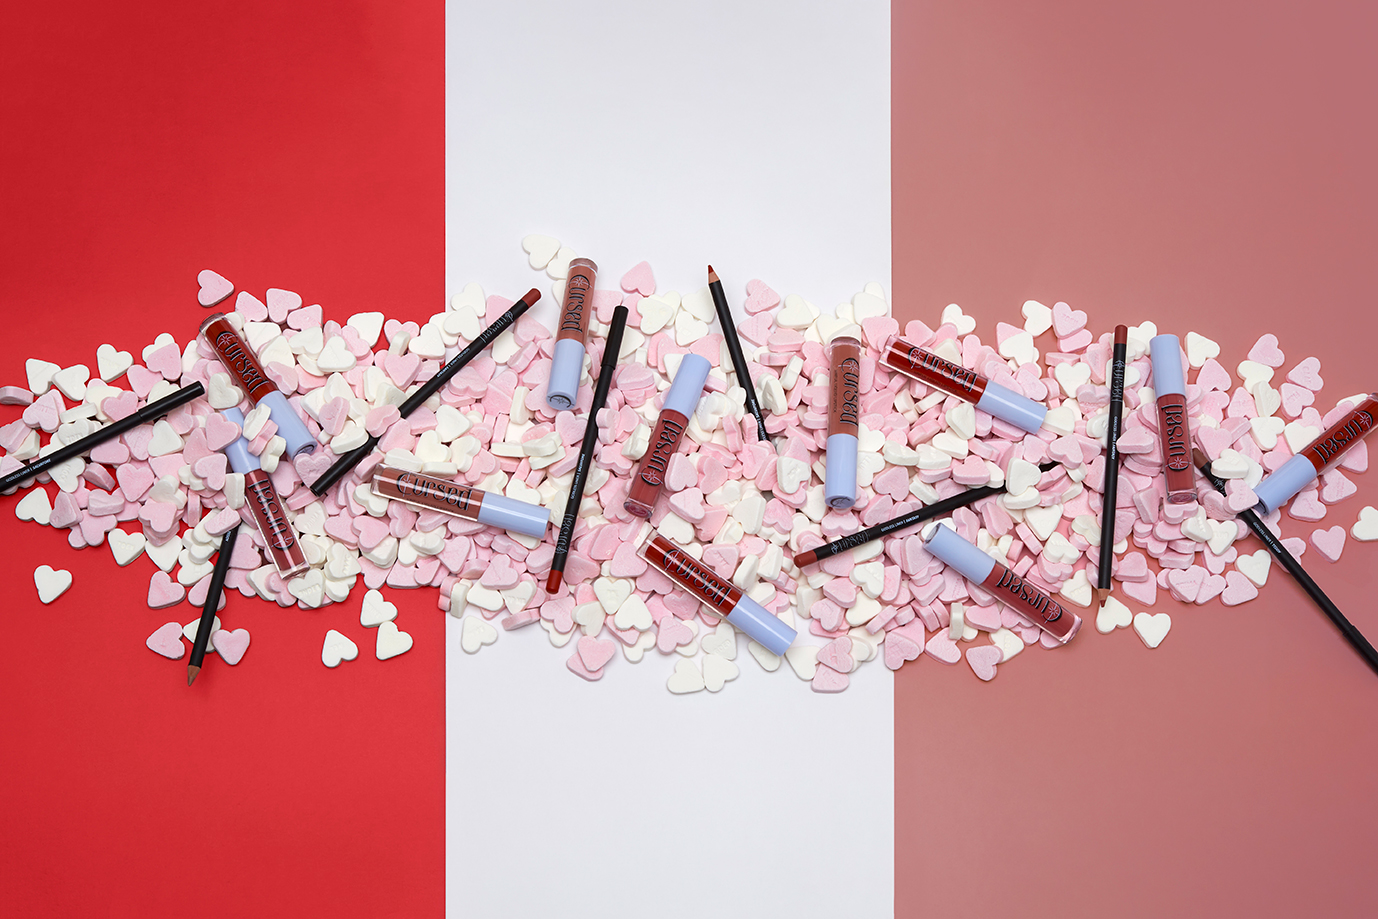 Make-up products on a red, white, pink background with sugar candy and the make-up products on the suger hearts.